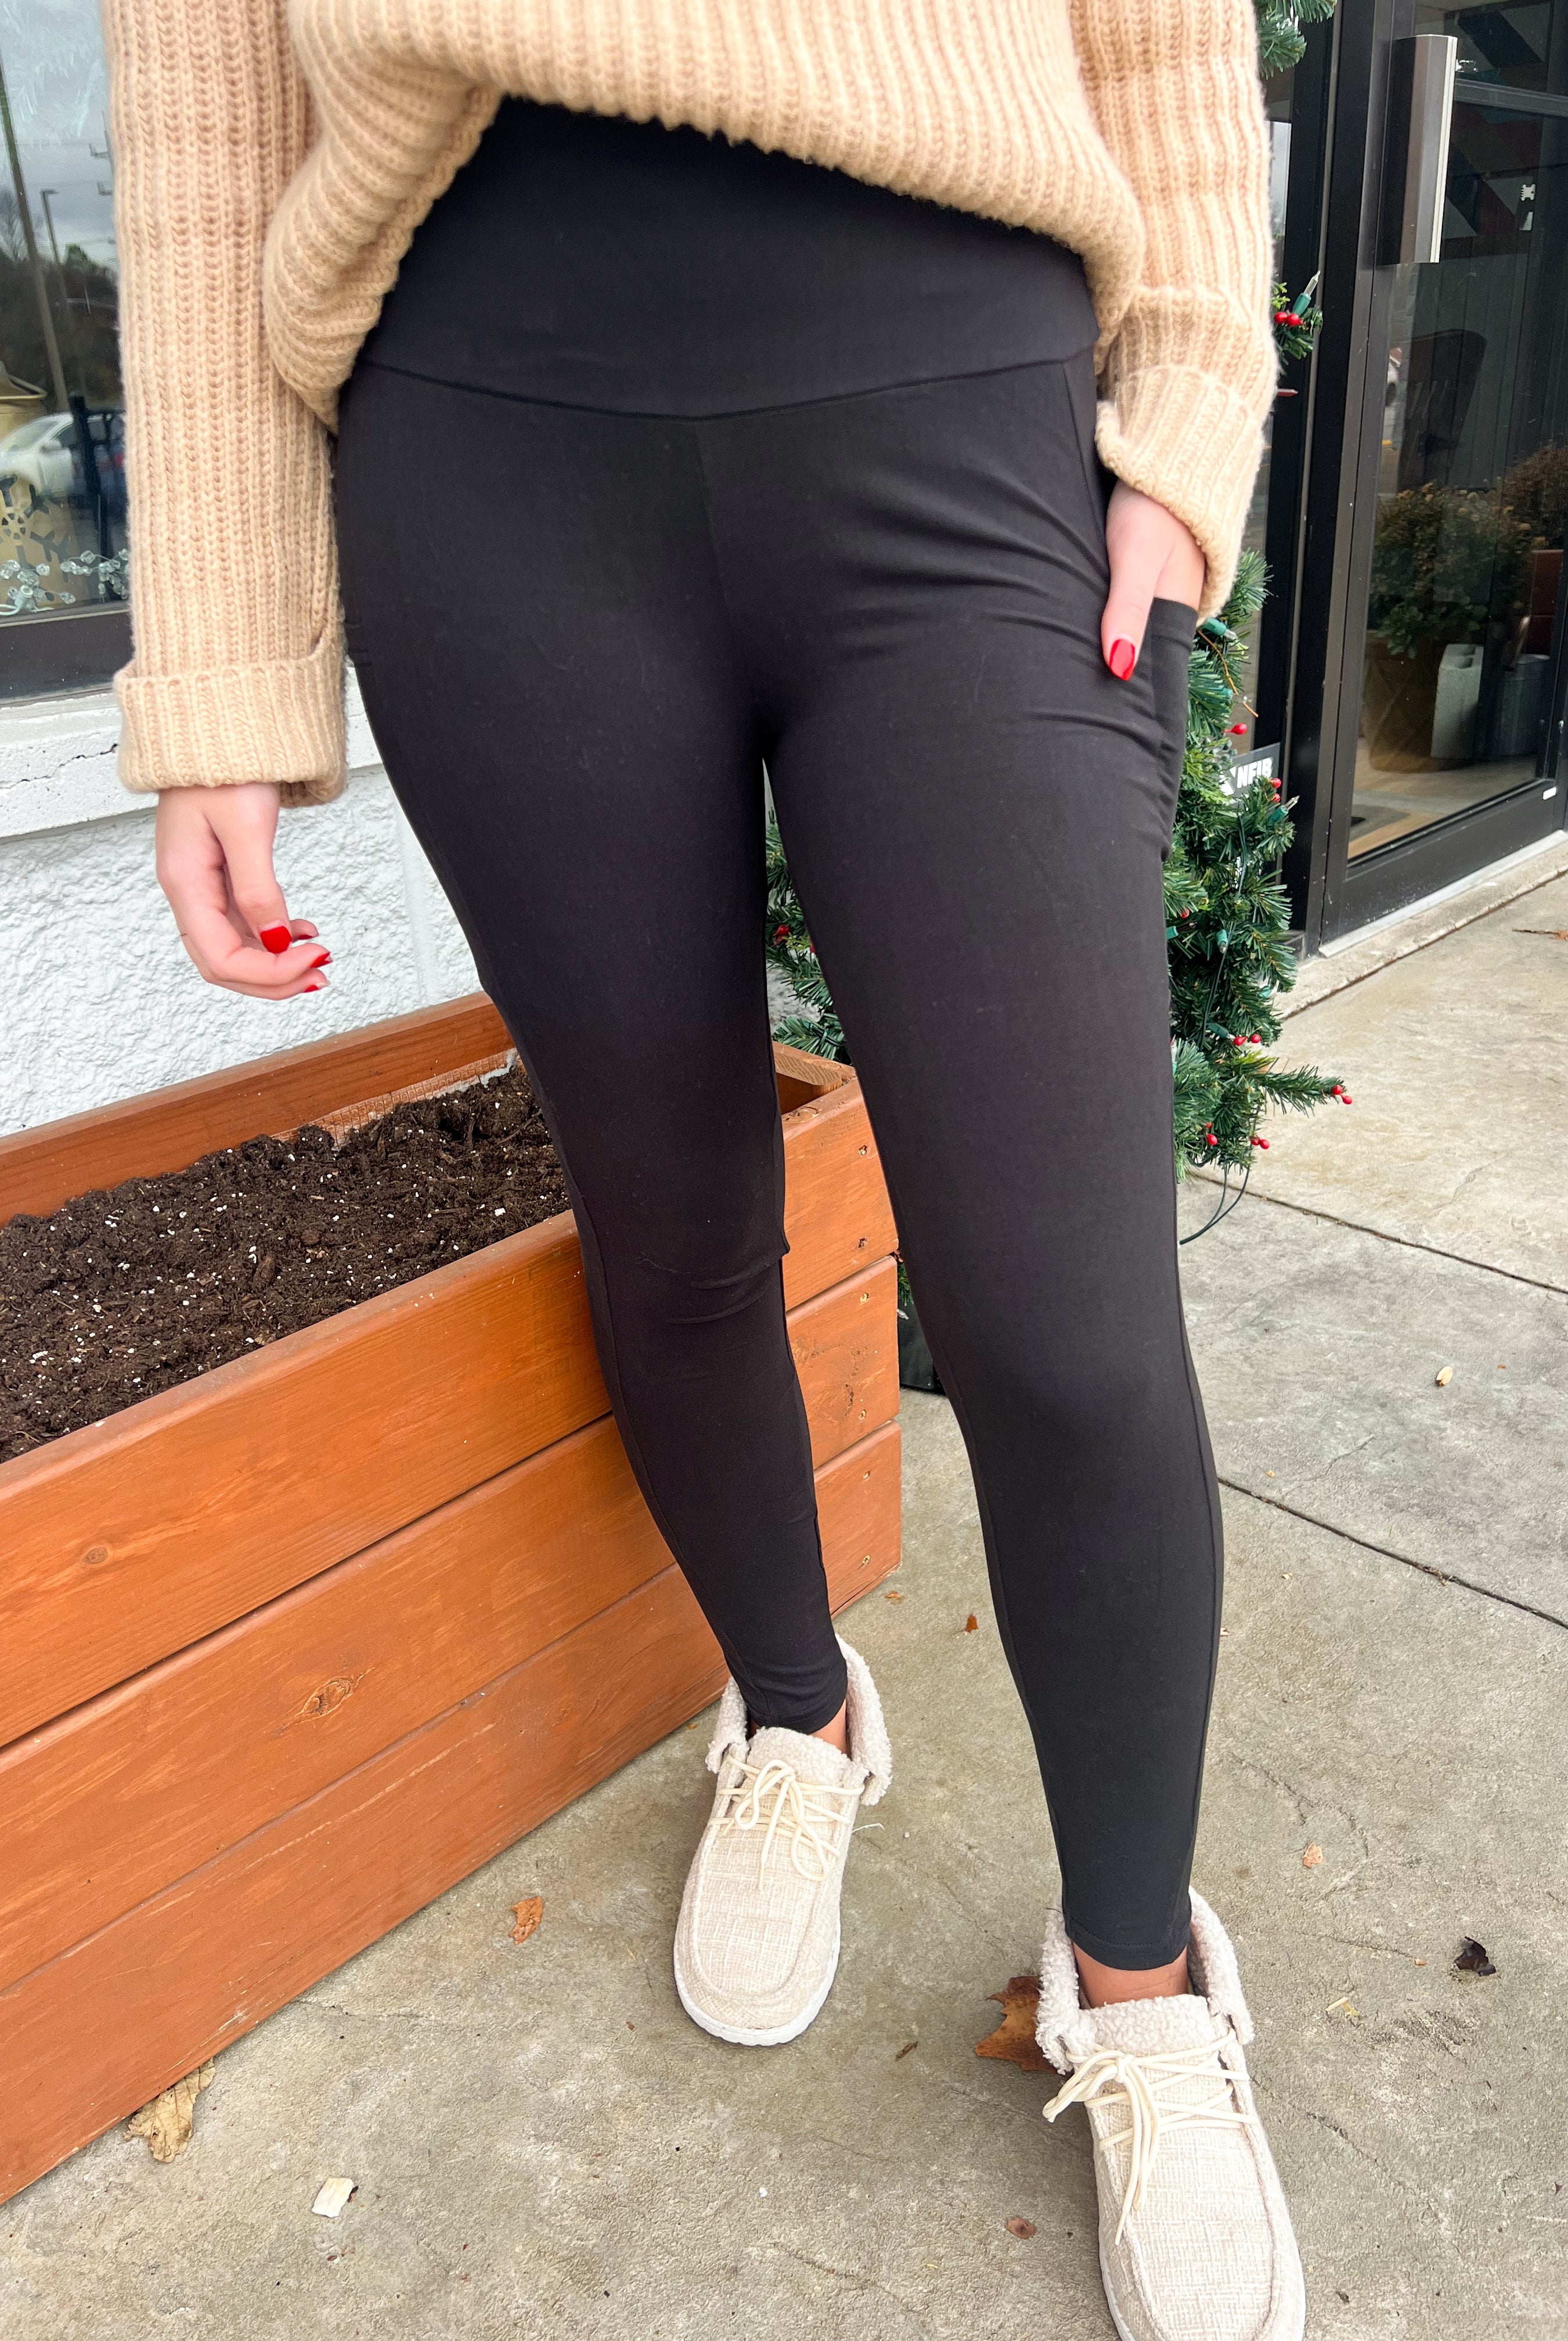 Living In These Pocket Leggings 3.0-220 Joggers/Leggings-The Lovely Closet-The Lovely Closet, Women's Fashion Boutique in Alexandria, KY